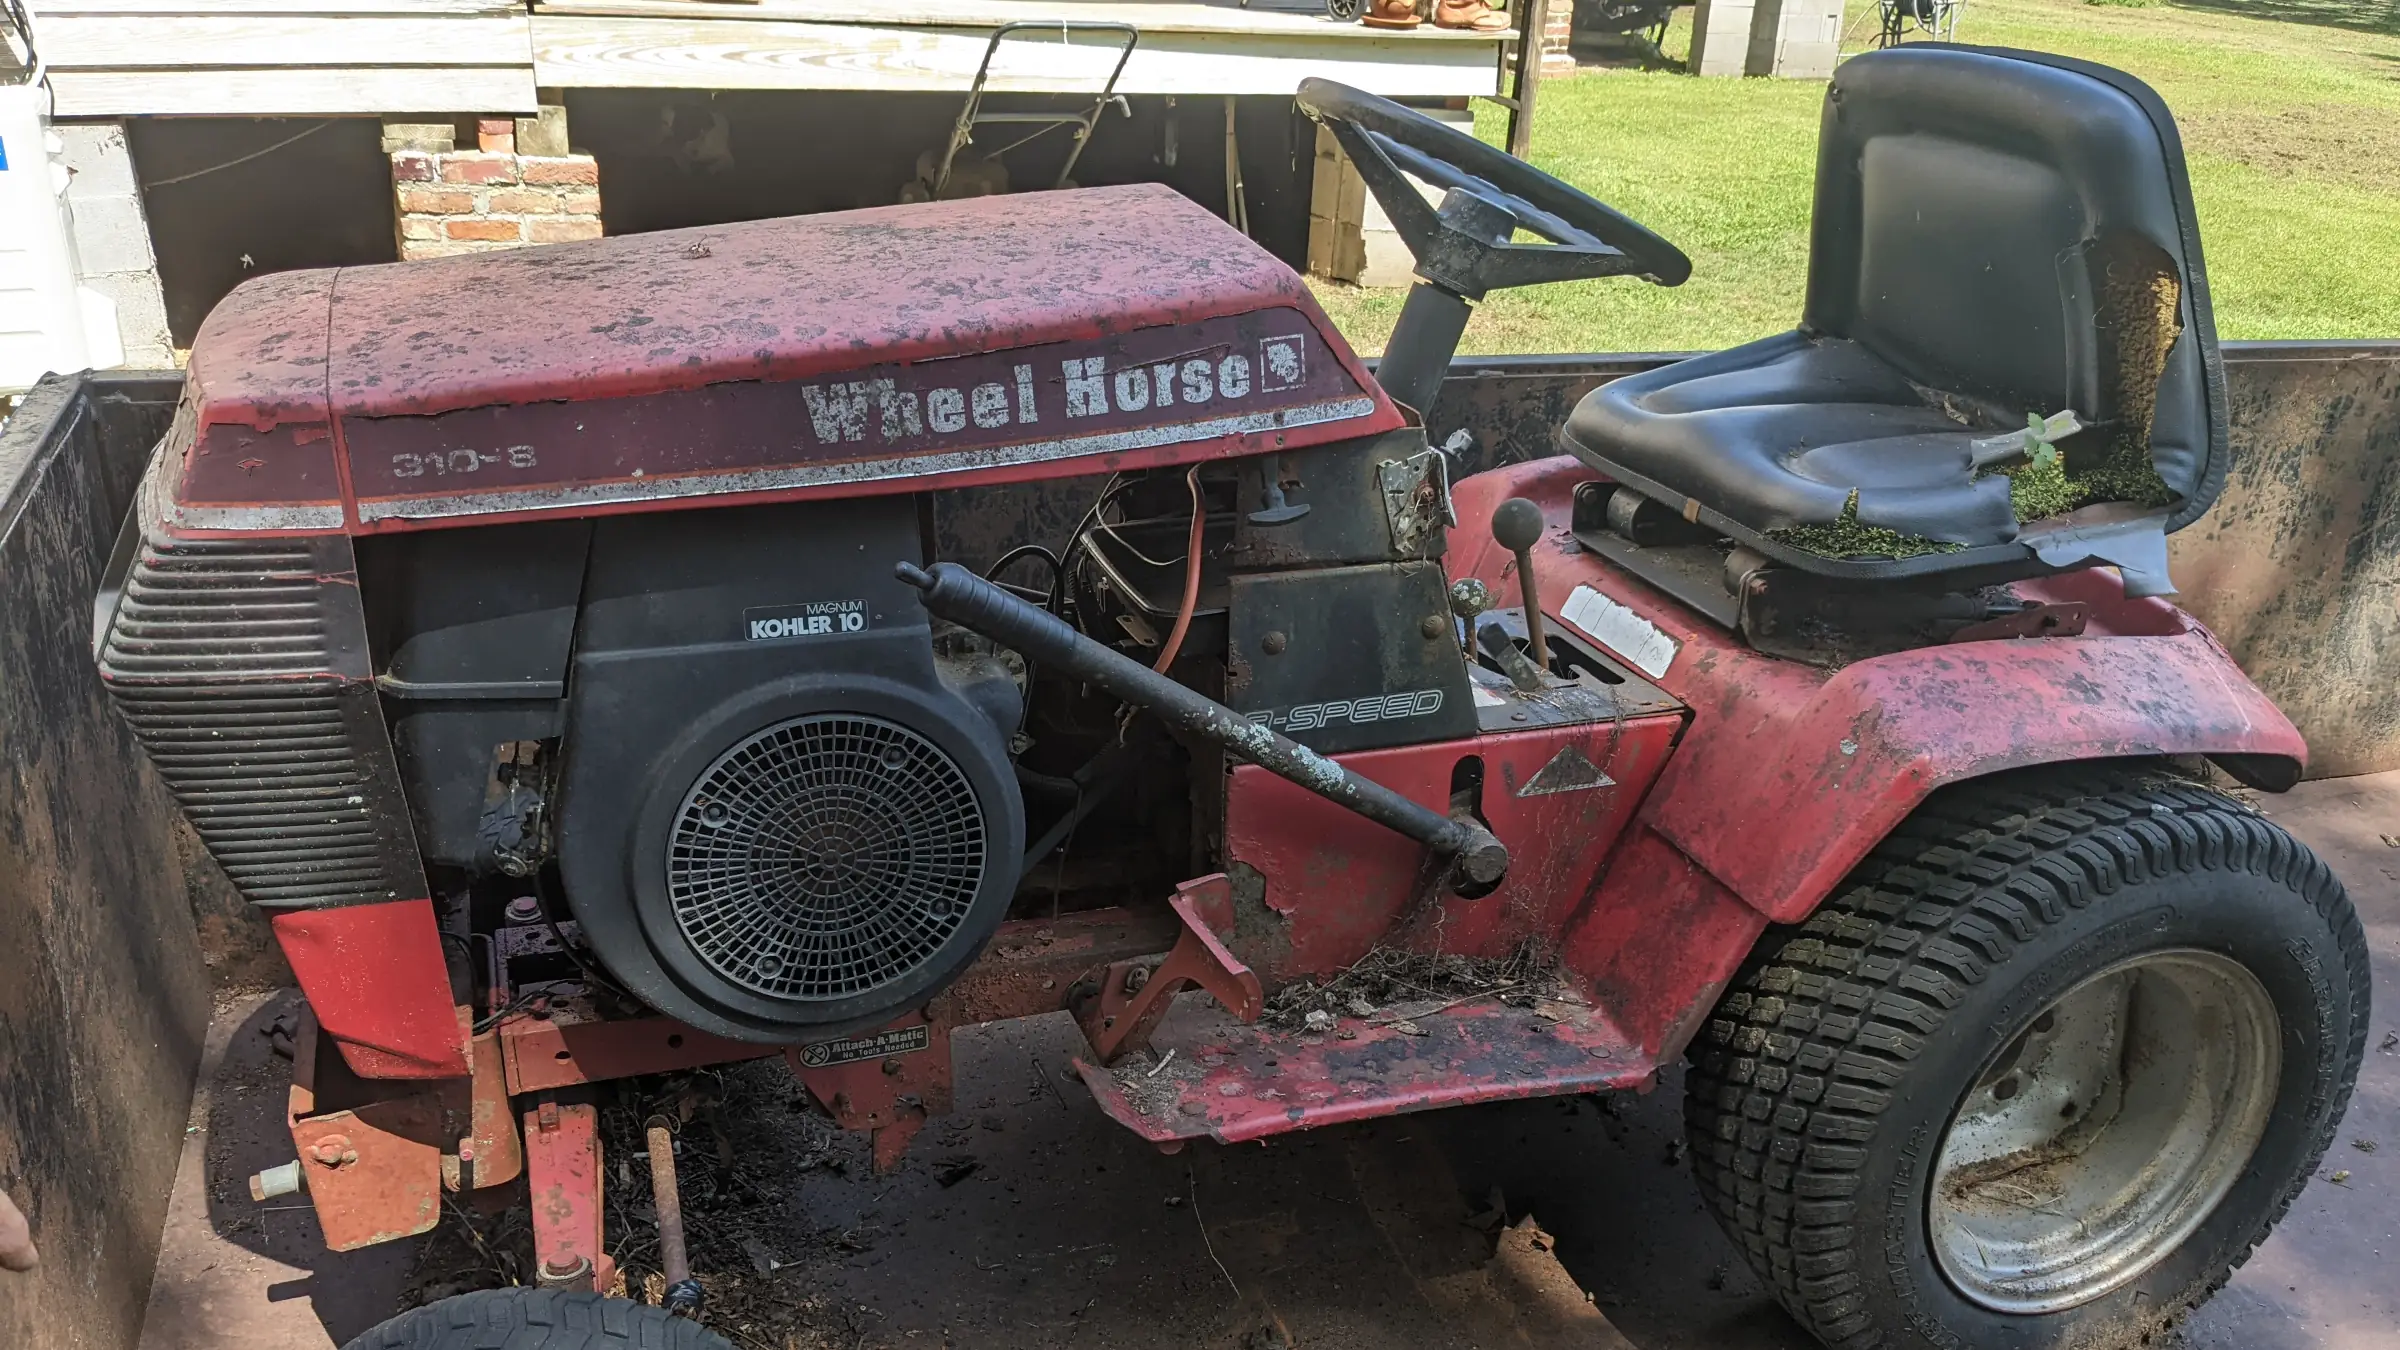 Old red riding lawn mower with peeling paint and rust sitting on a trailer bed.